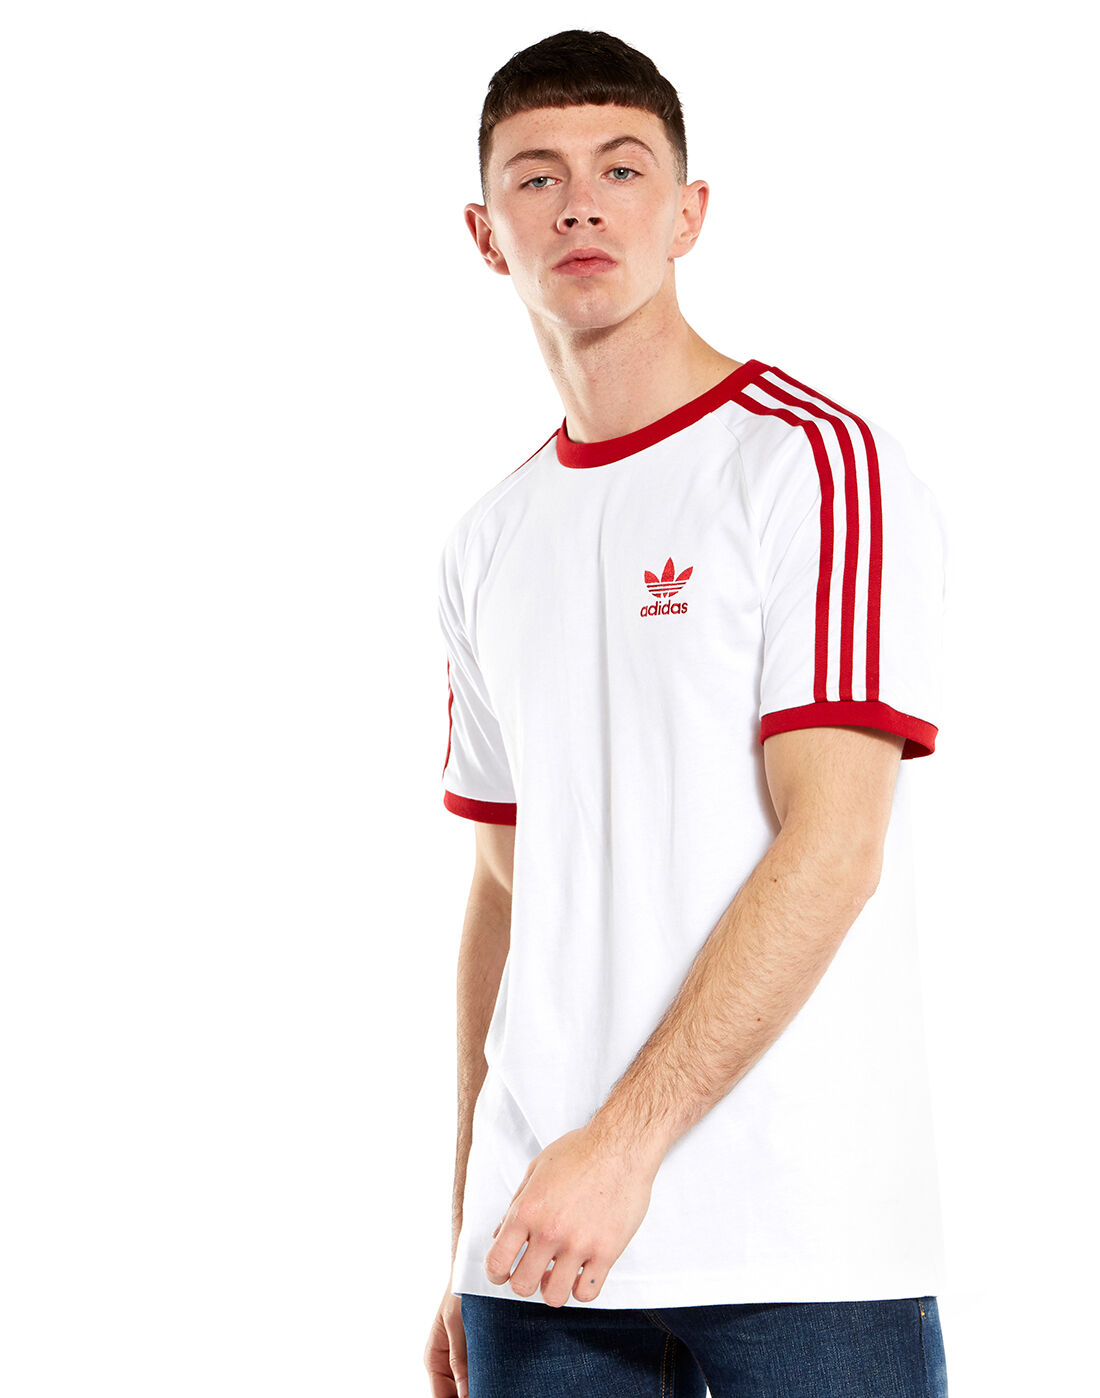 white adidas t shirt with red logo